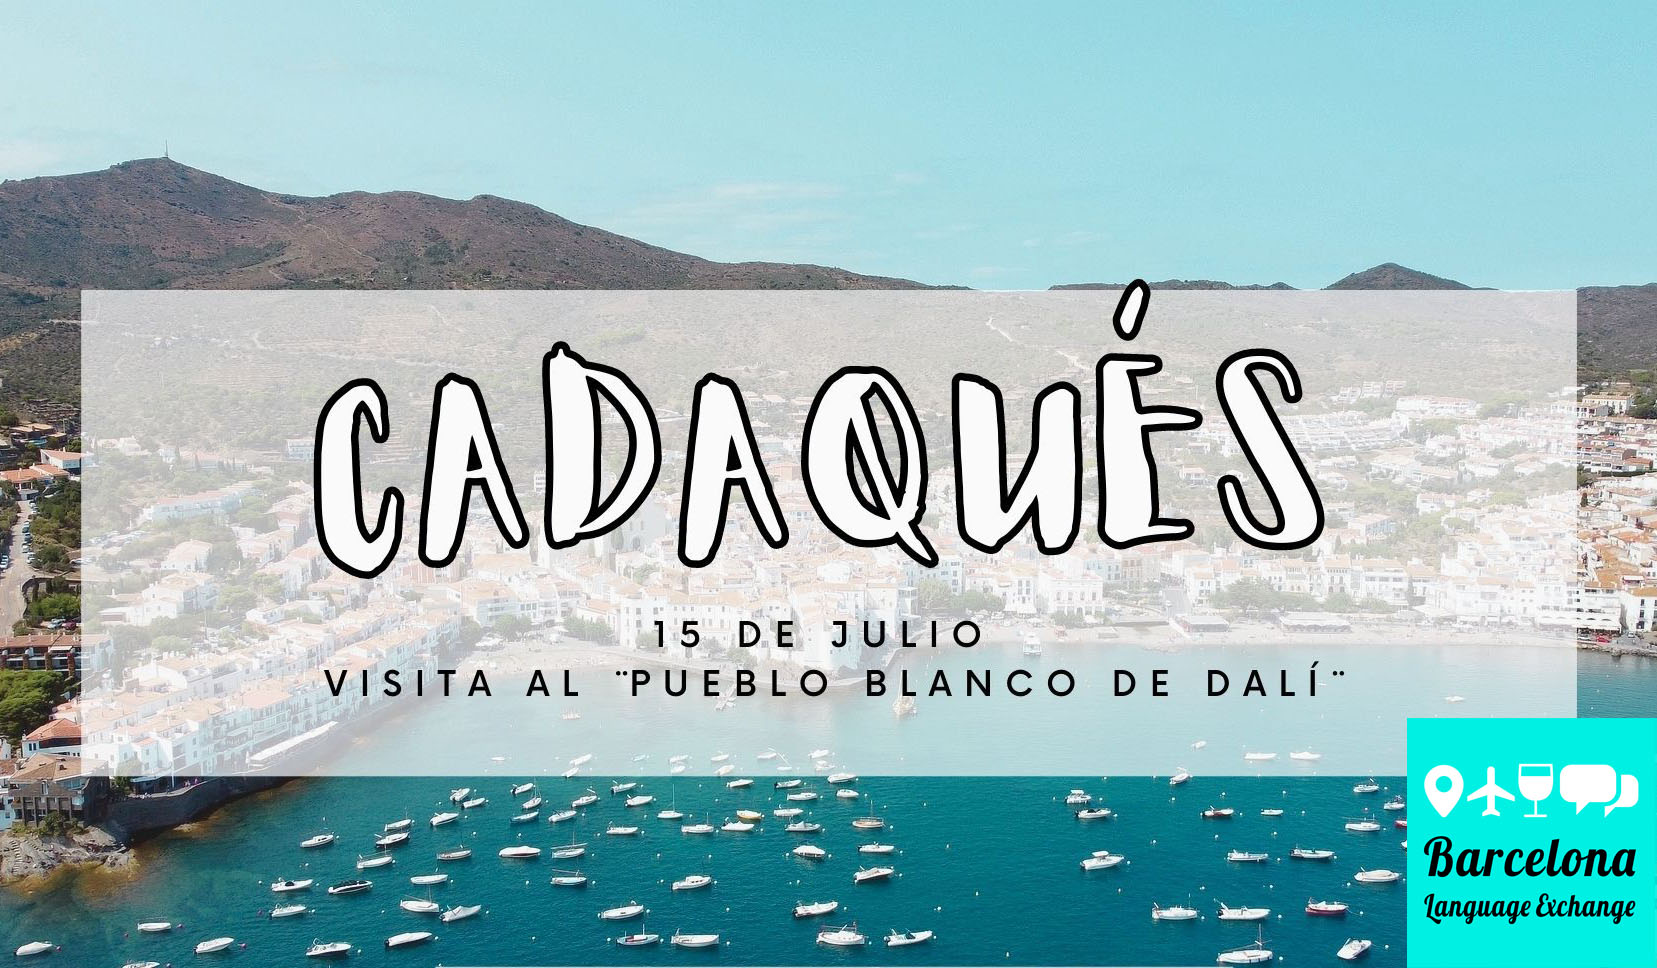 Day Trip to Cadaques